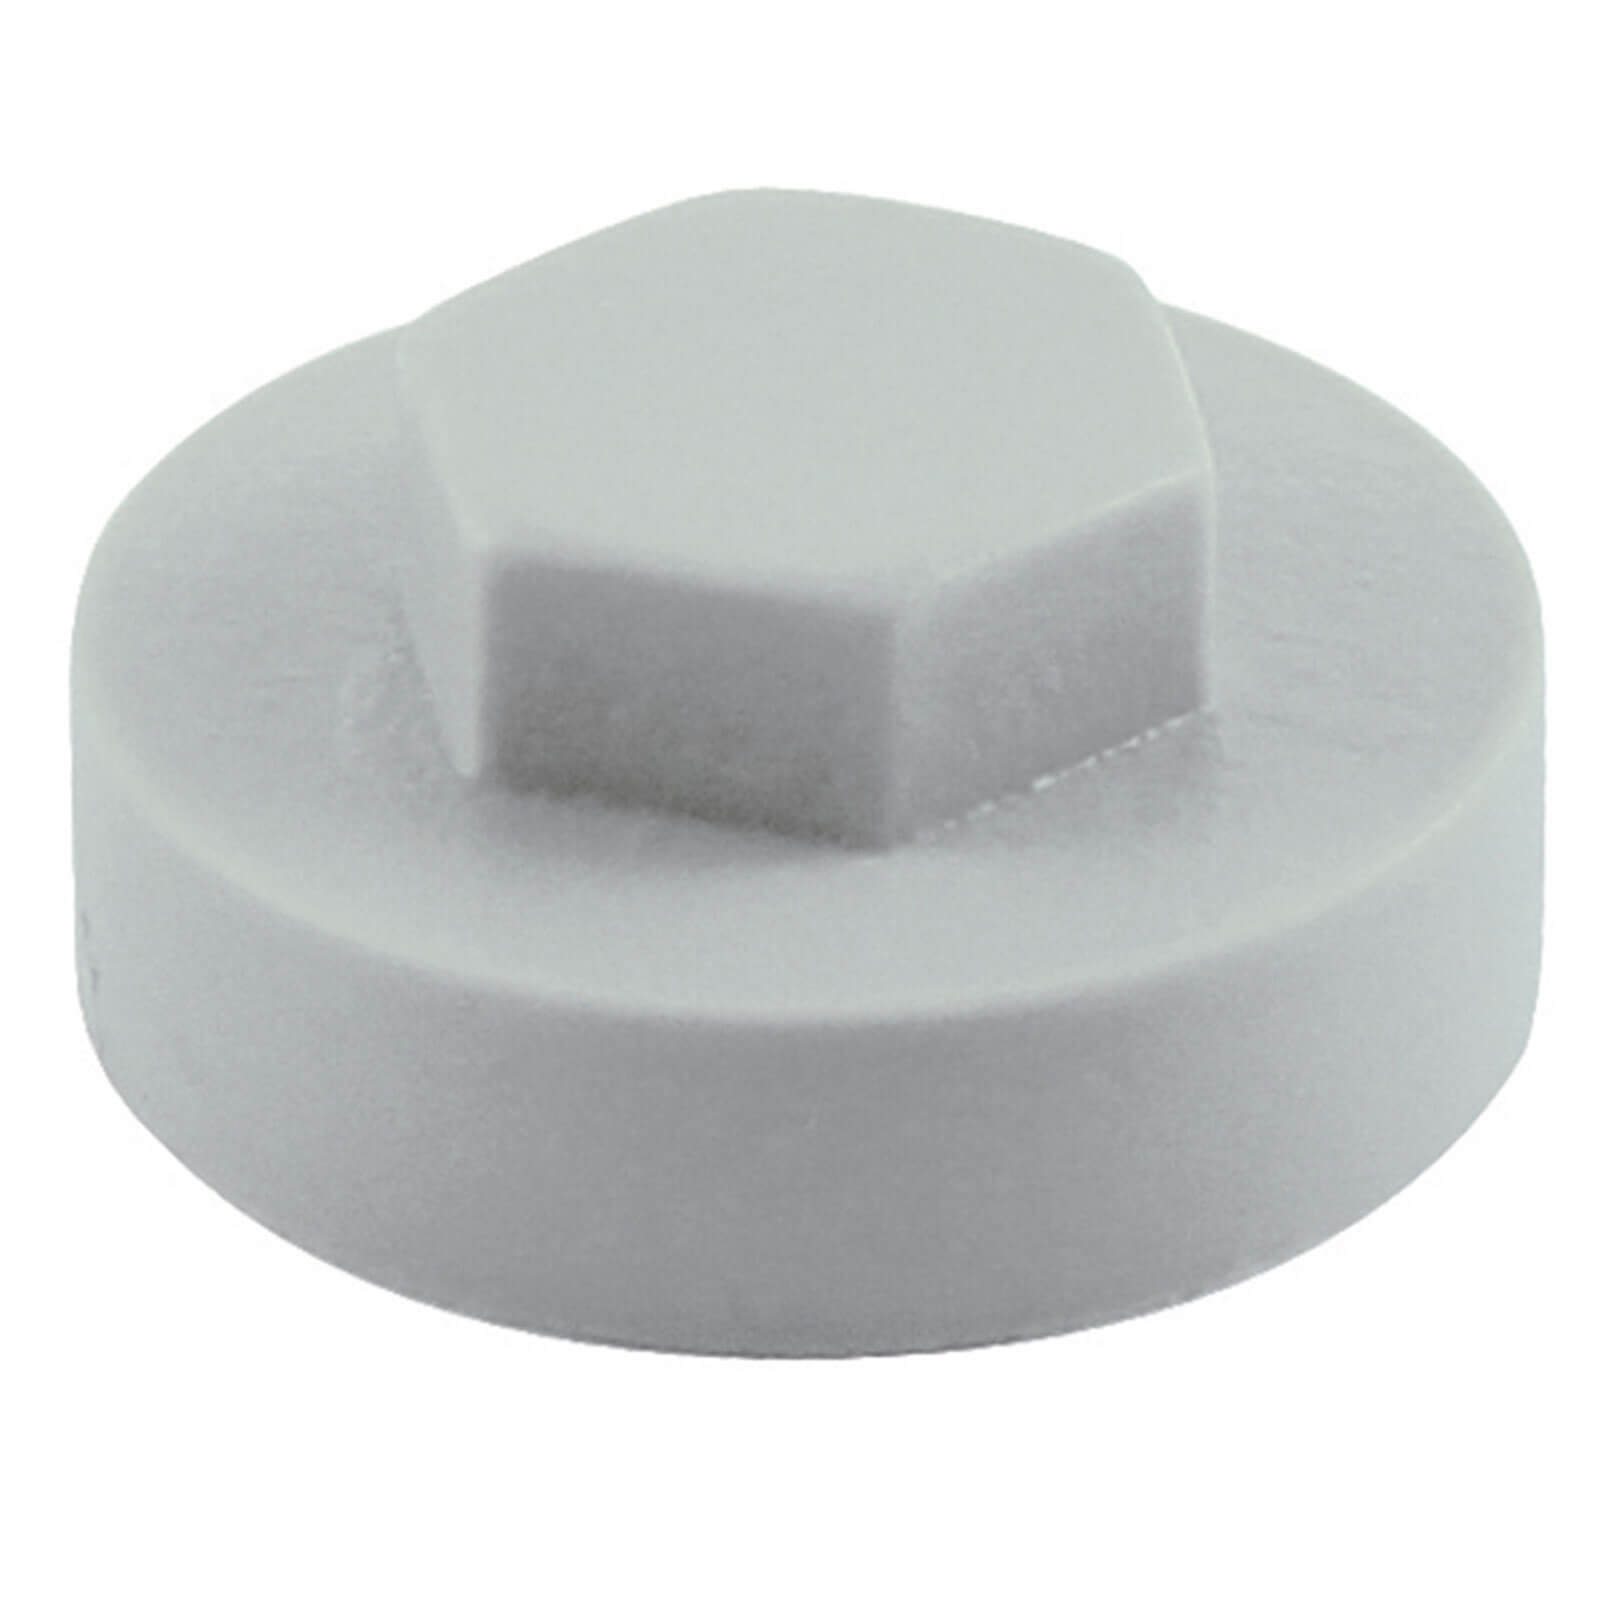 Image of Colour Match Hexagon Screw Cover Cap 5/16" x 16mm Goosewing Grey Pack of 1000